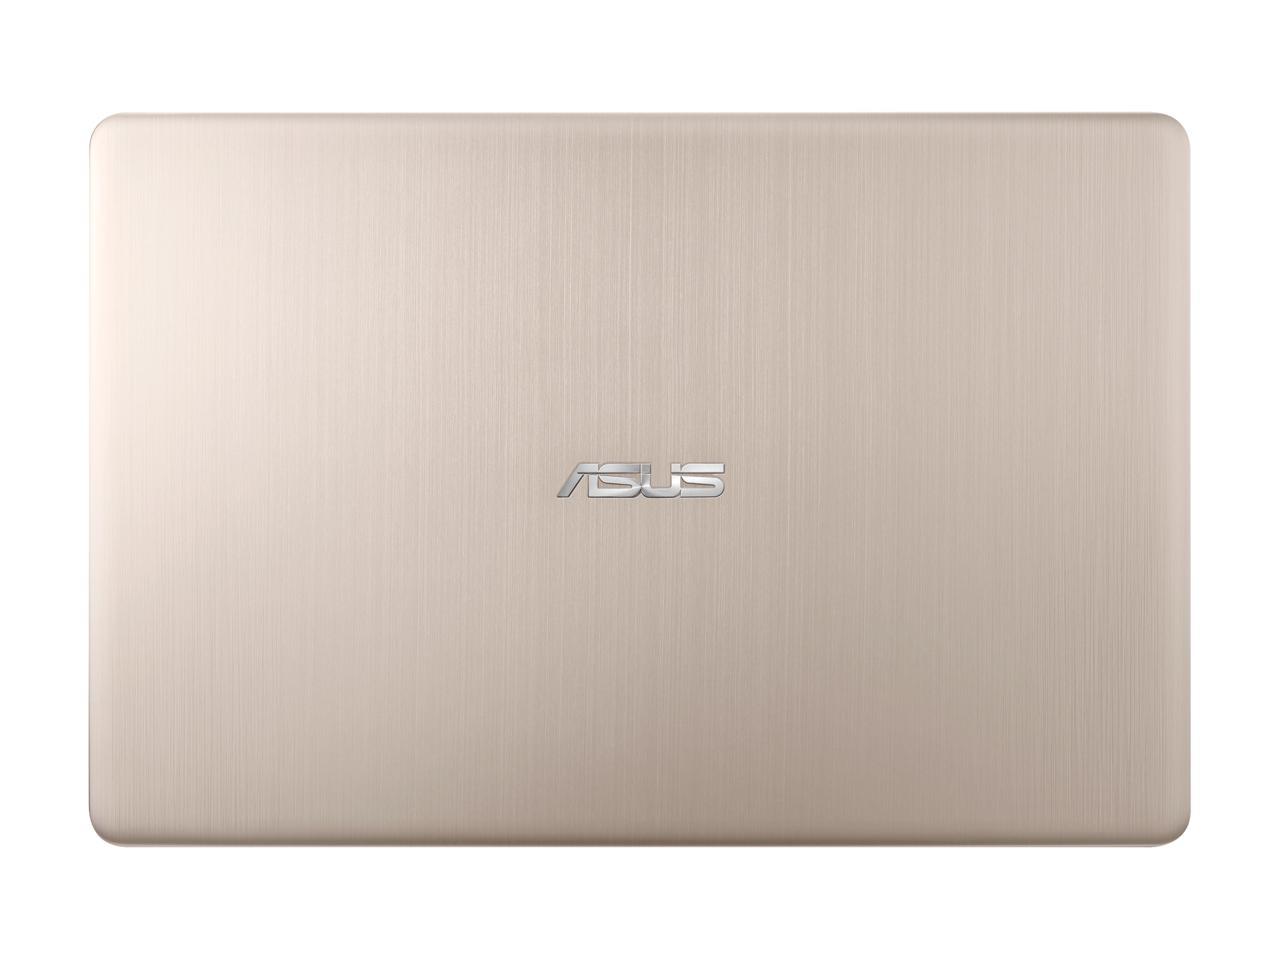 Asus Vivobook S510un Eh76 156 Full Hd Thin And Portable Laptop Intel